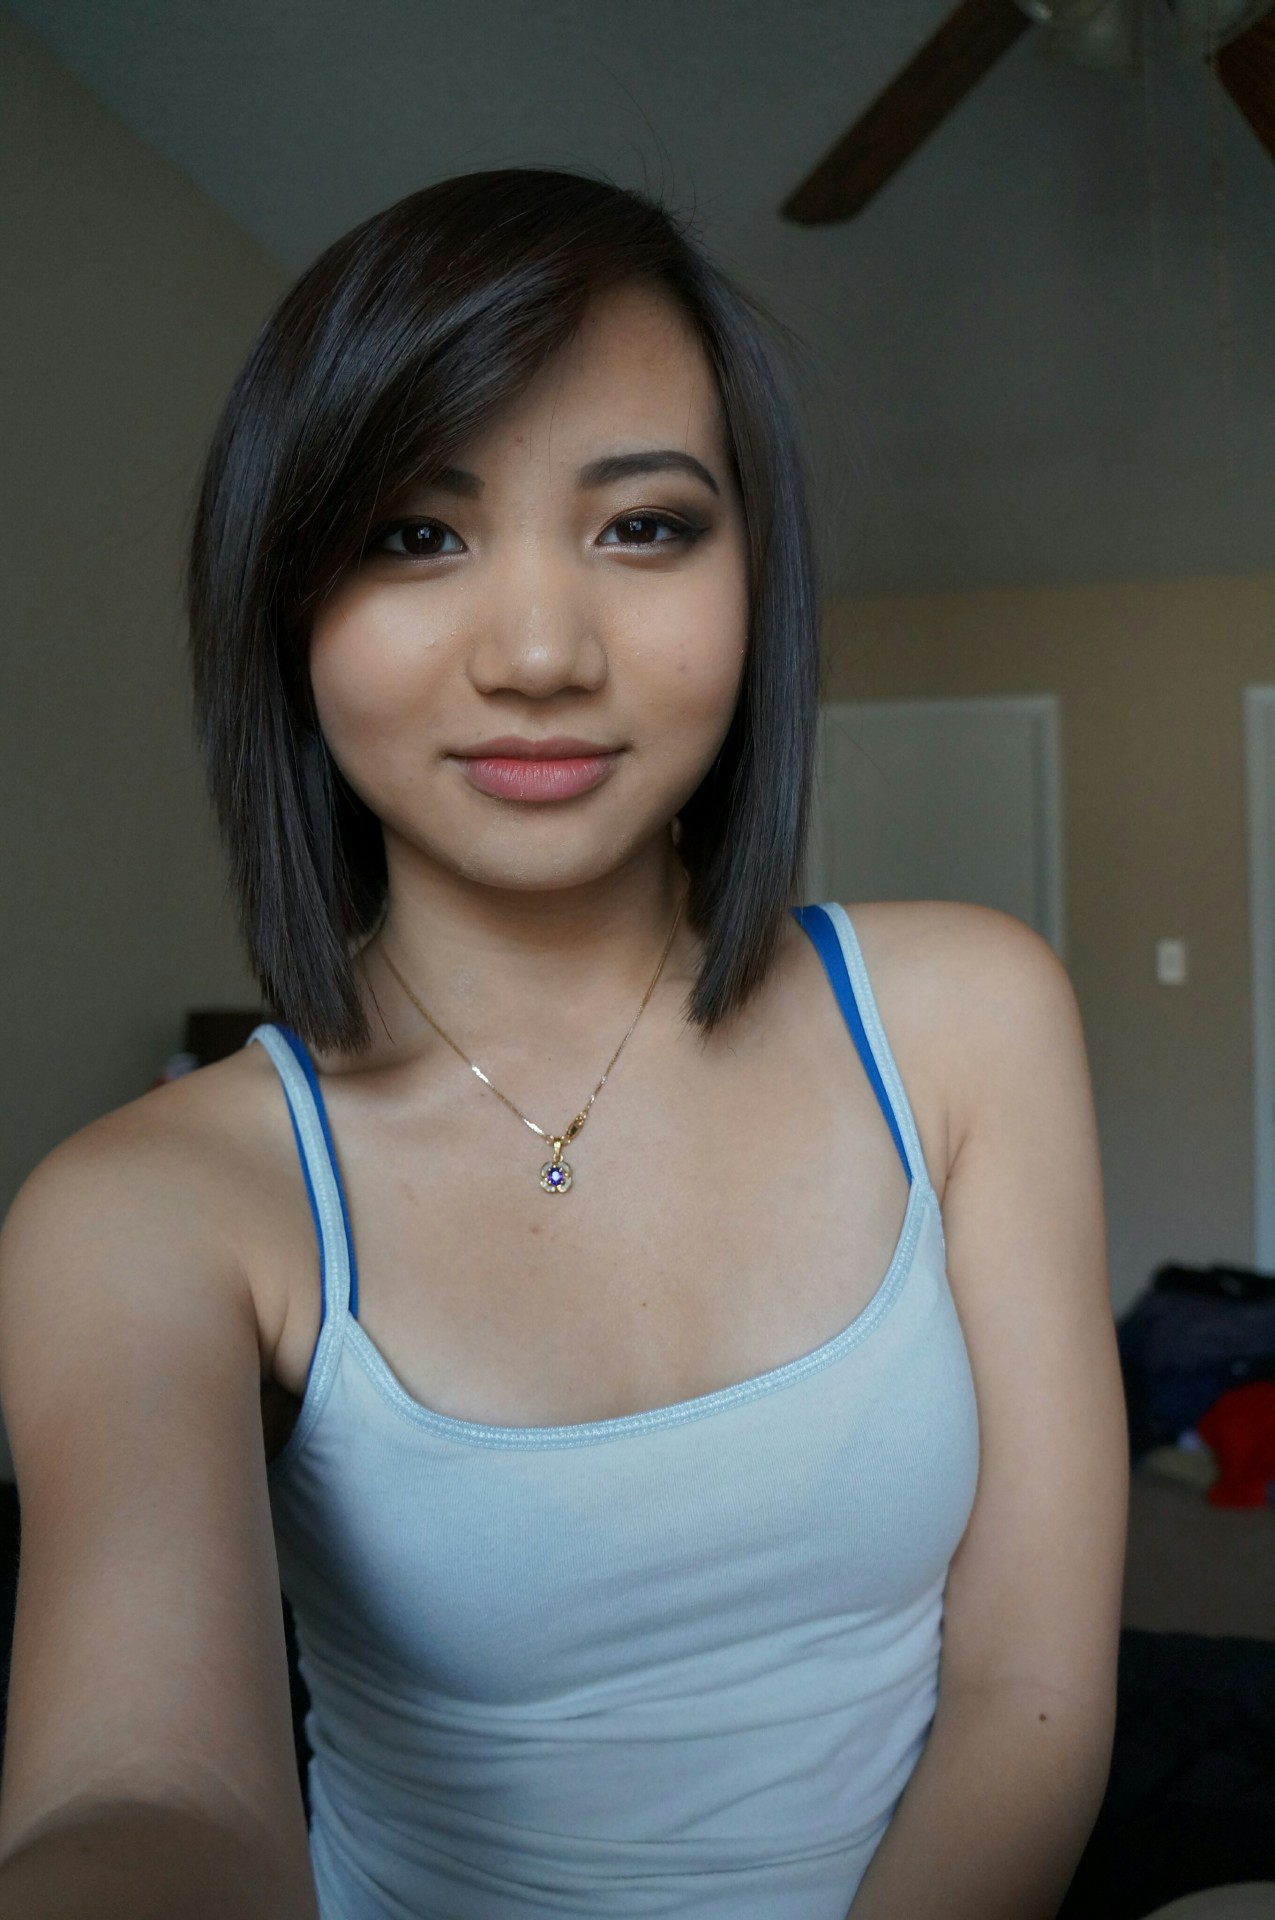 Asian Porn Star With Braces 24